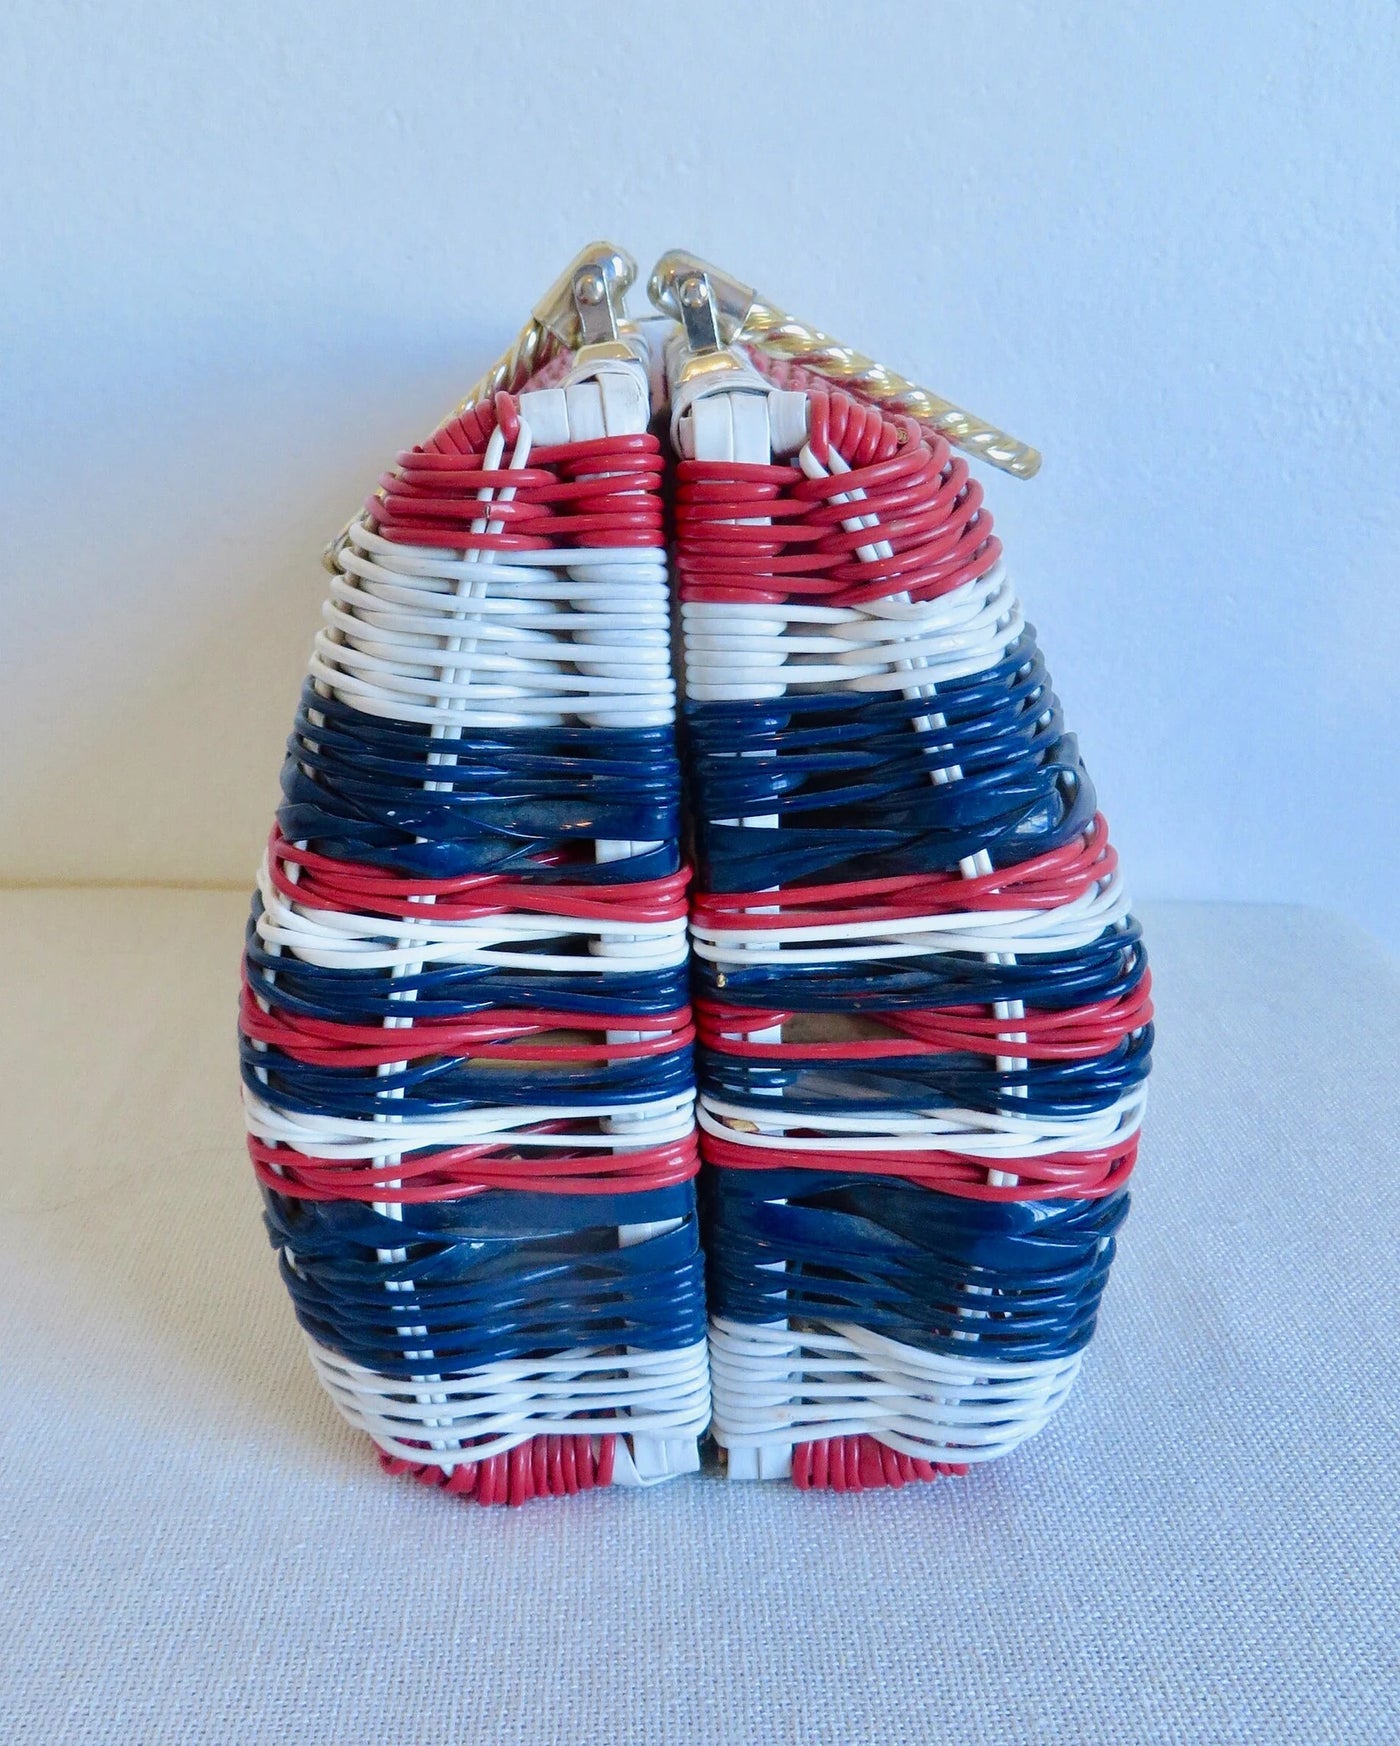 VINTAGE 1960's LARGE RED, WHITE & BLUE WOVEN WICKER PURSE